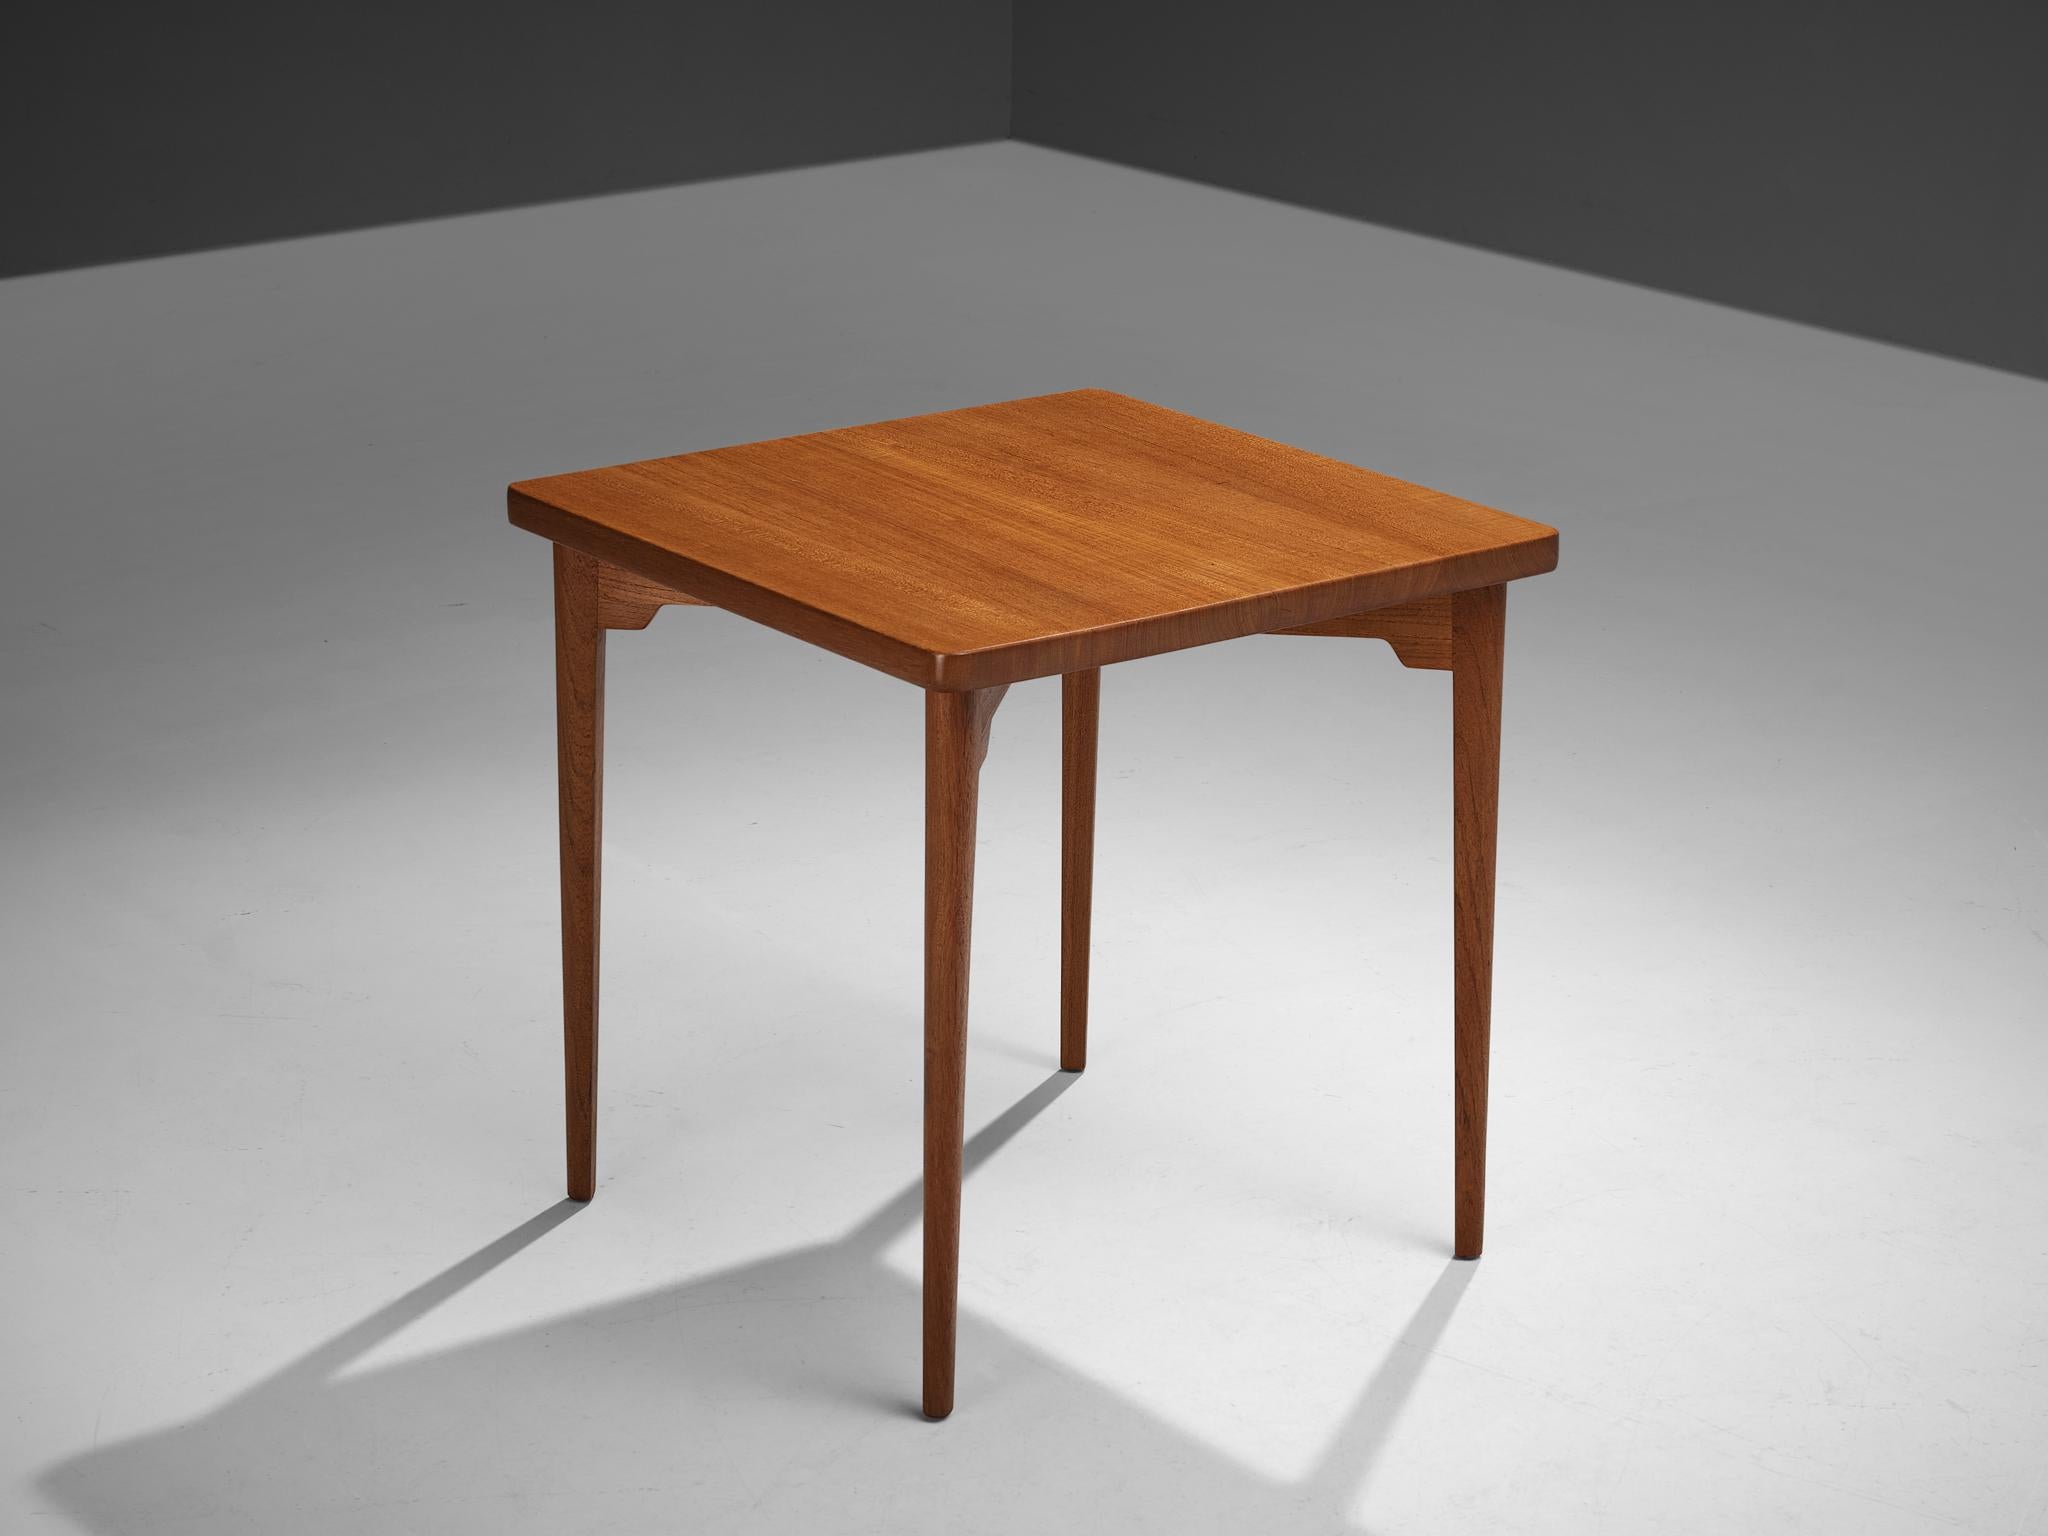 Palle Suenson, table, teak, Denmark, c. 1940  

Striking Scandinavian Modern table by Danish architect and designer Palle Suenson (1904-1987). This particular table is specifically designed for the new office building of Aarhus Oil Fabrik A/S,